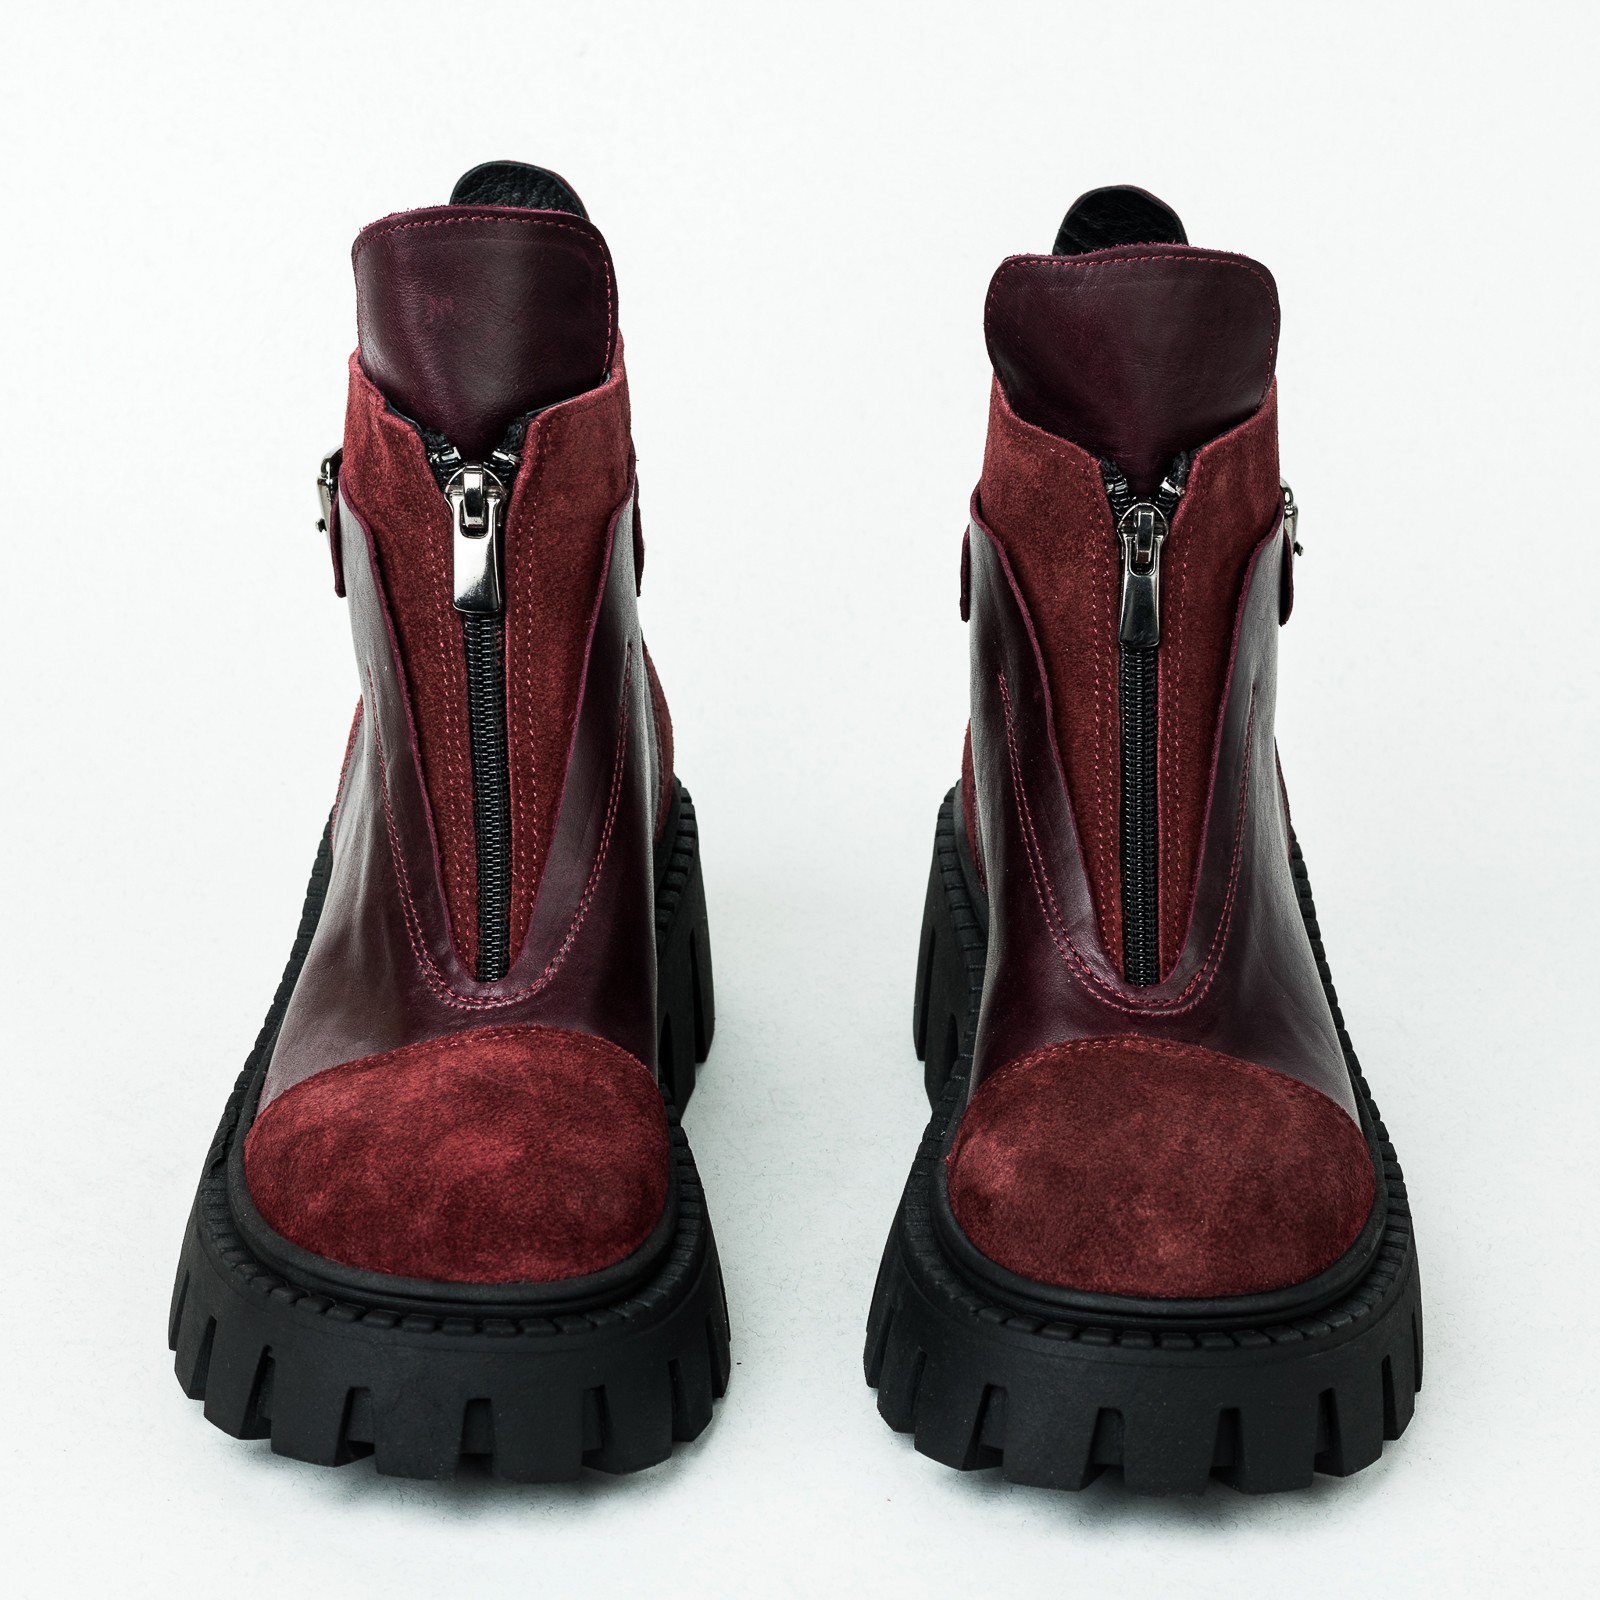 Leather booties B246 - WINE RED